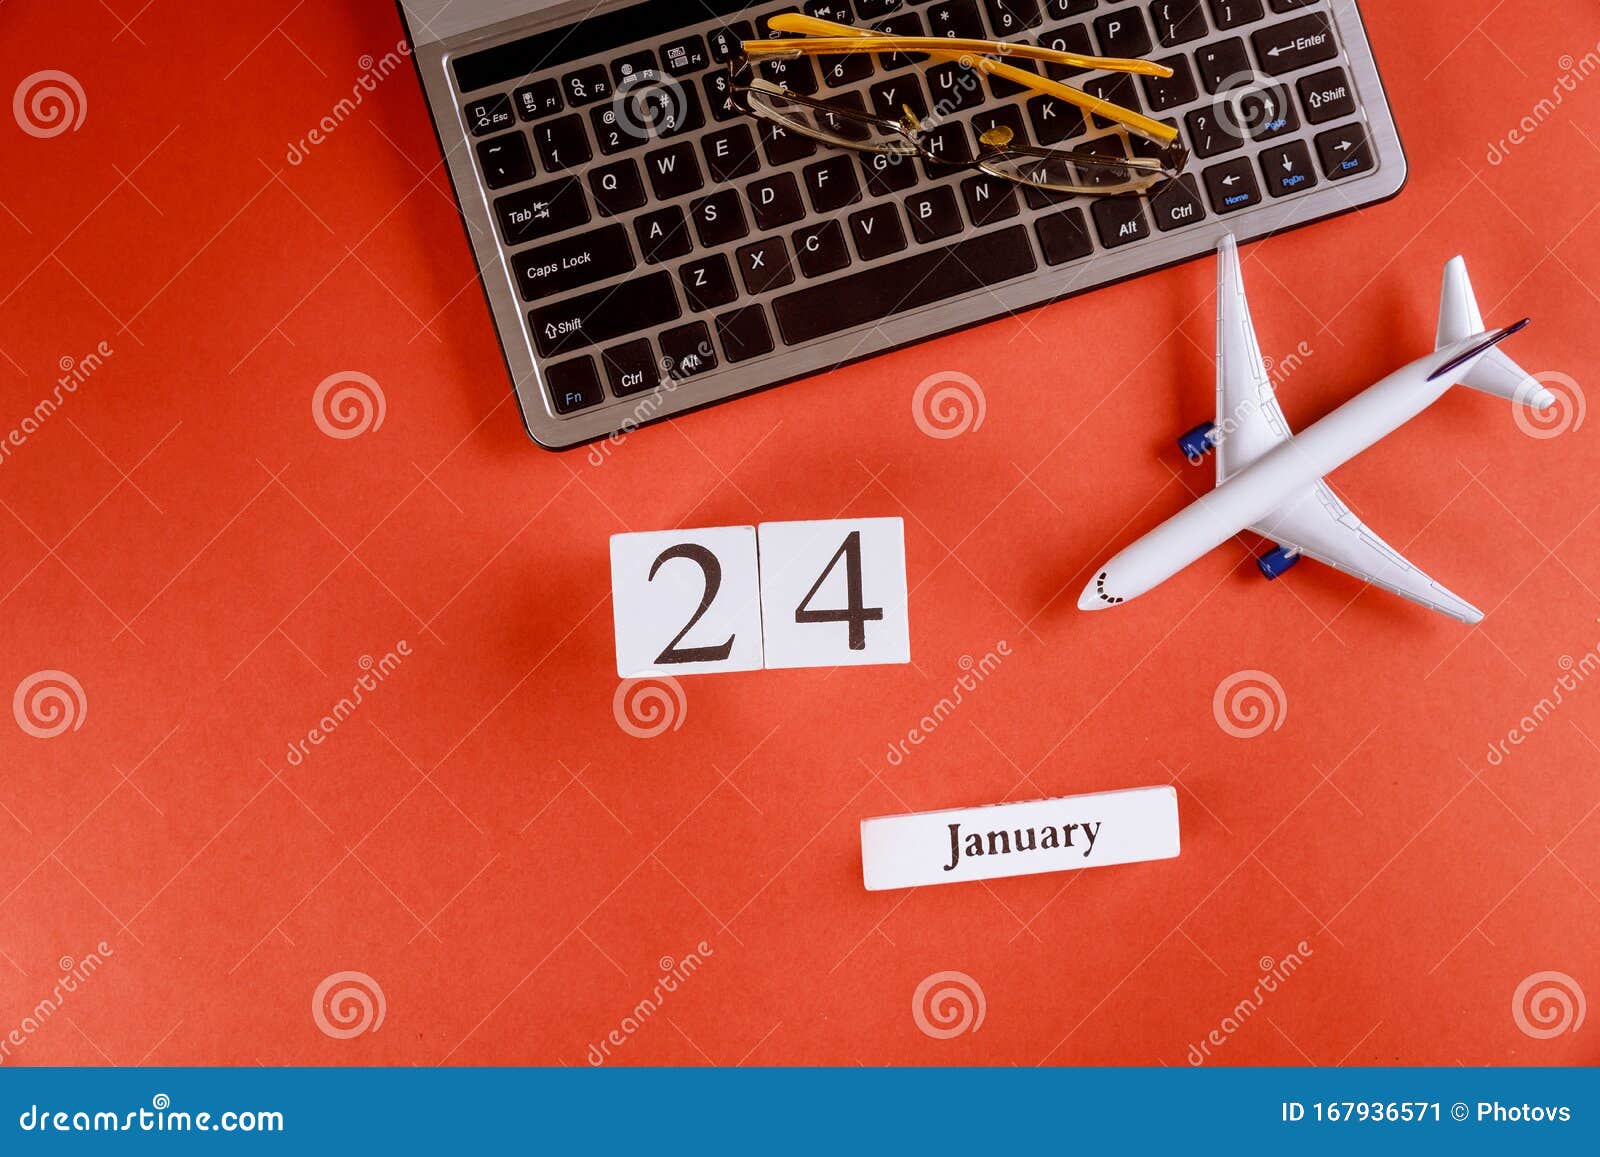 24 January Calendar With Accessories On Business Workspace Office